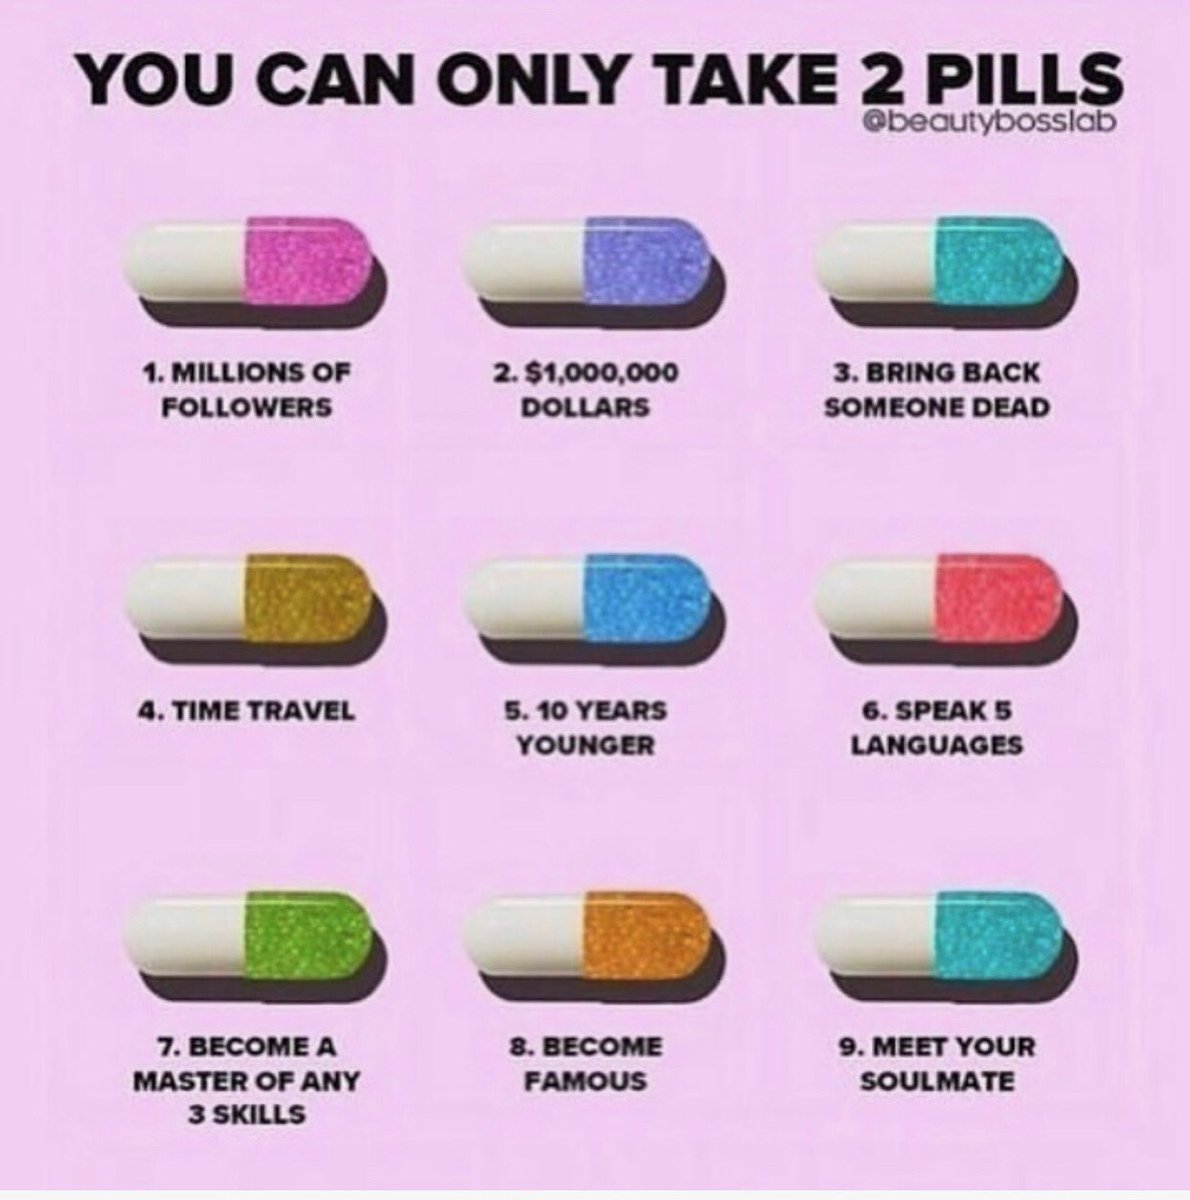 Which two would you take? ???????????? https://t.co/xDBs3YjzkB